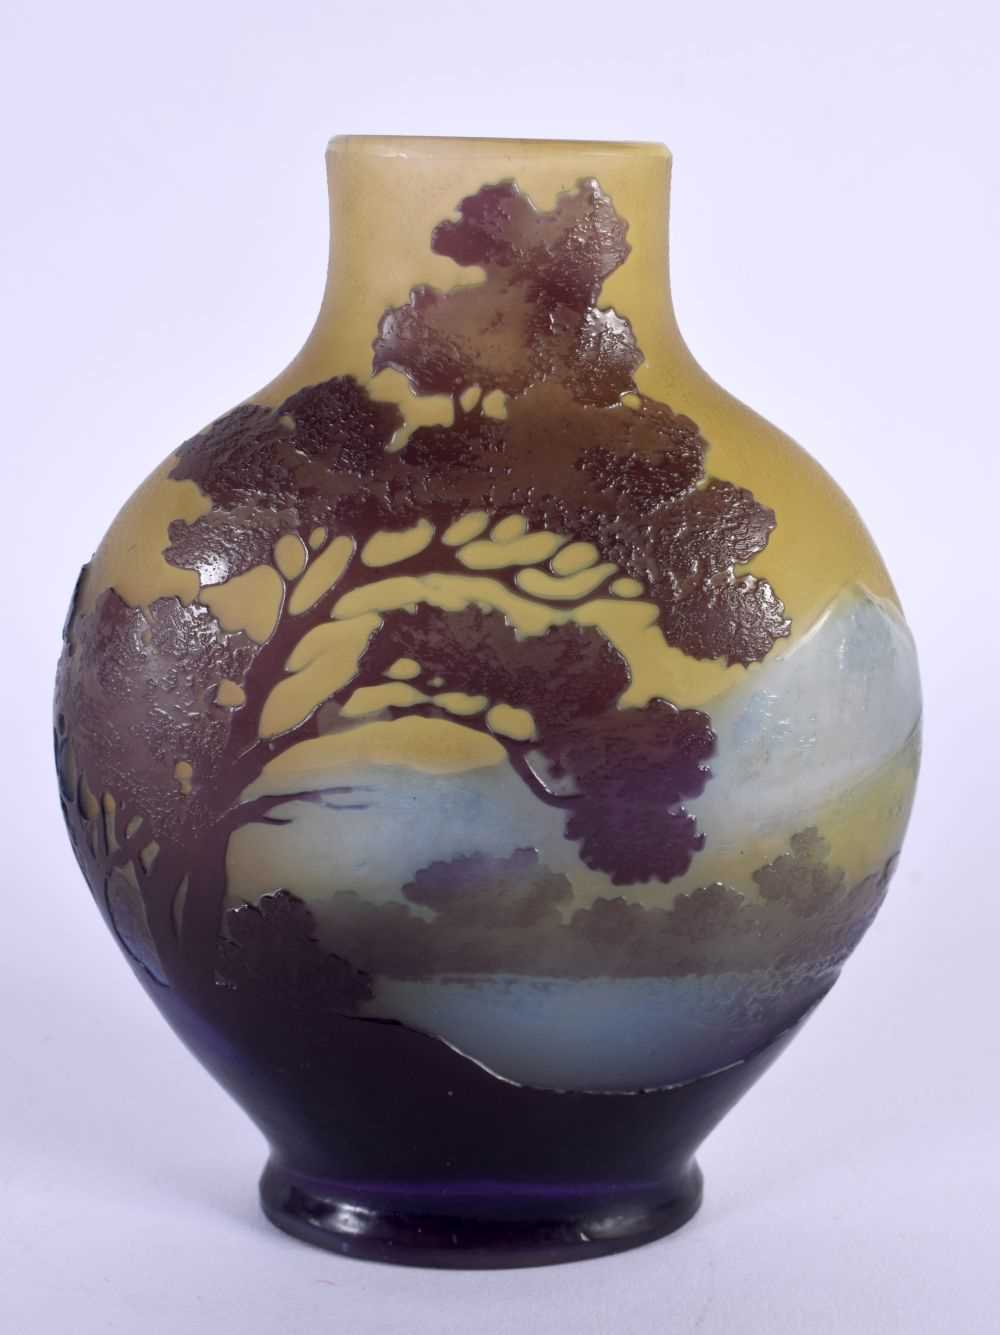 A FINE EARLY 20TH CENTURY FRENCH GALLE TRIPLE LAYER GLASS VASE decorated with landscapes. 12 cm x